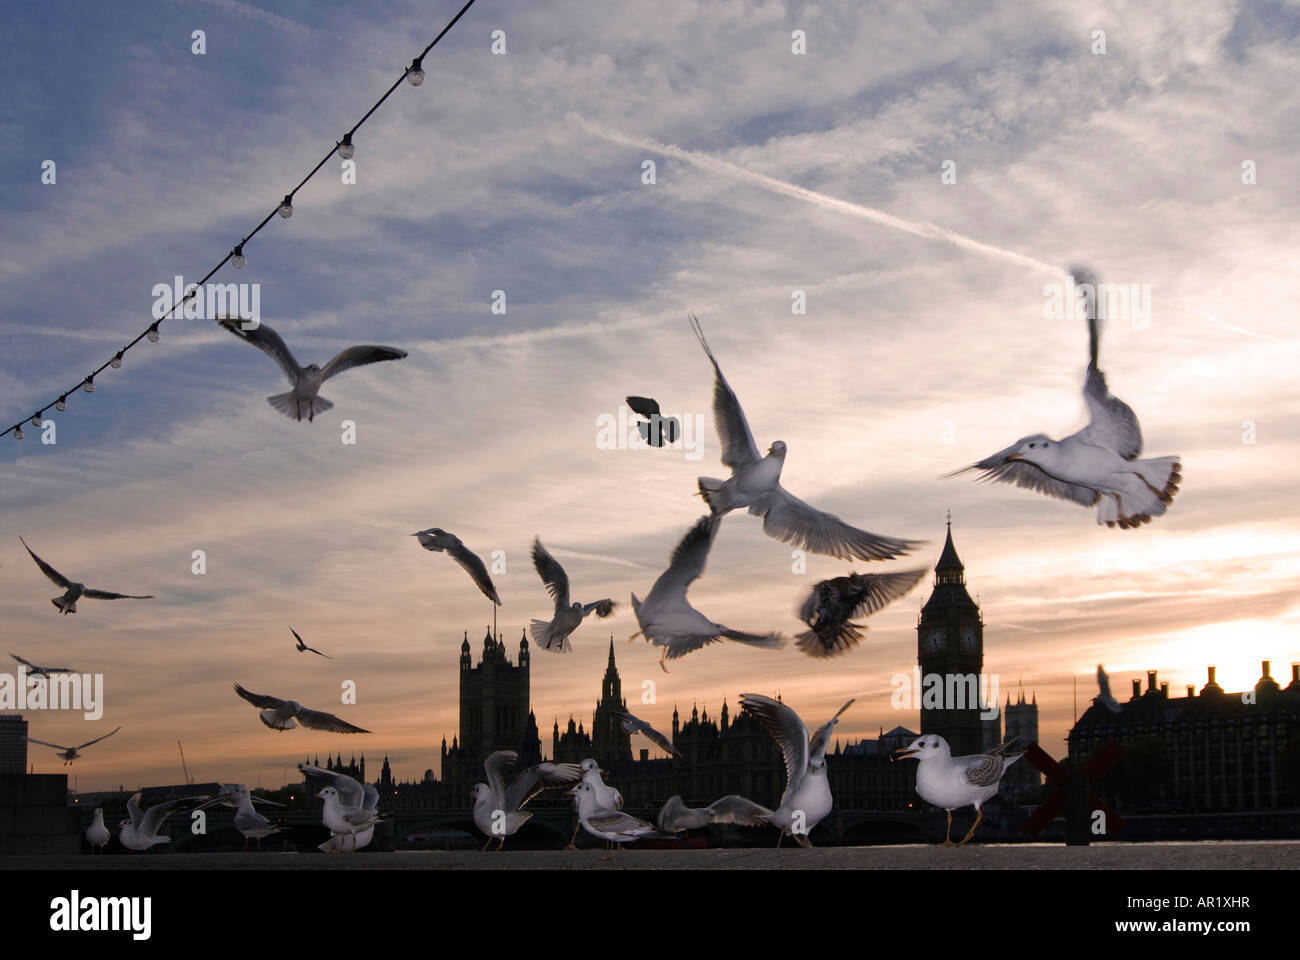 Horizontal wide angle of the Houses of Parliament and Big Ben silhouetted against a sunset with lots of seagulls flying. Stock Photo